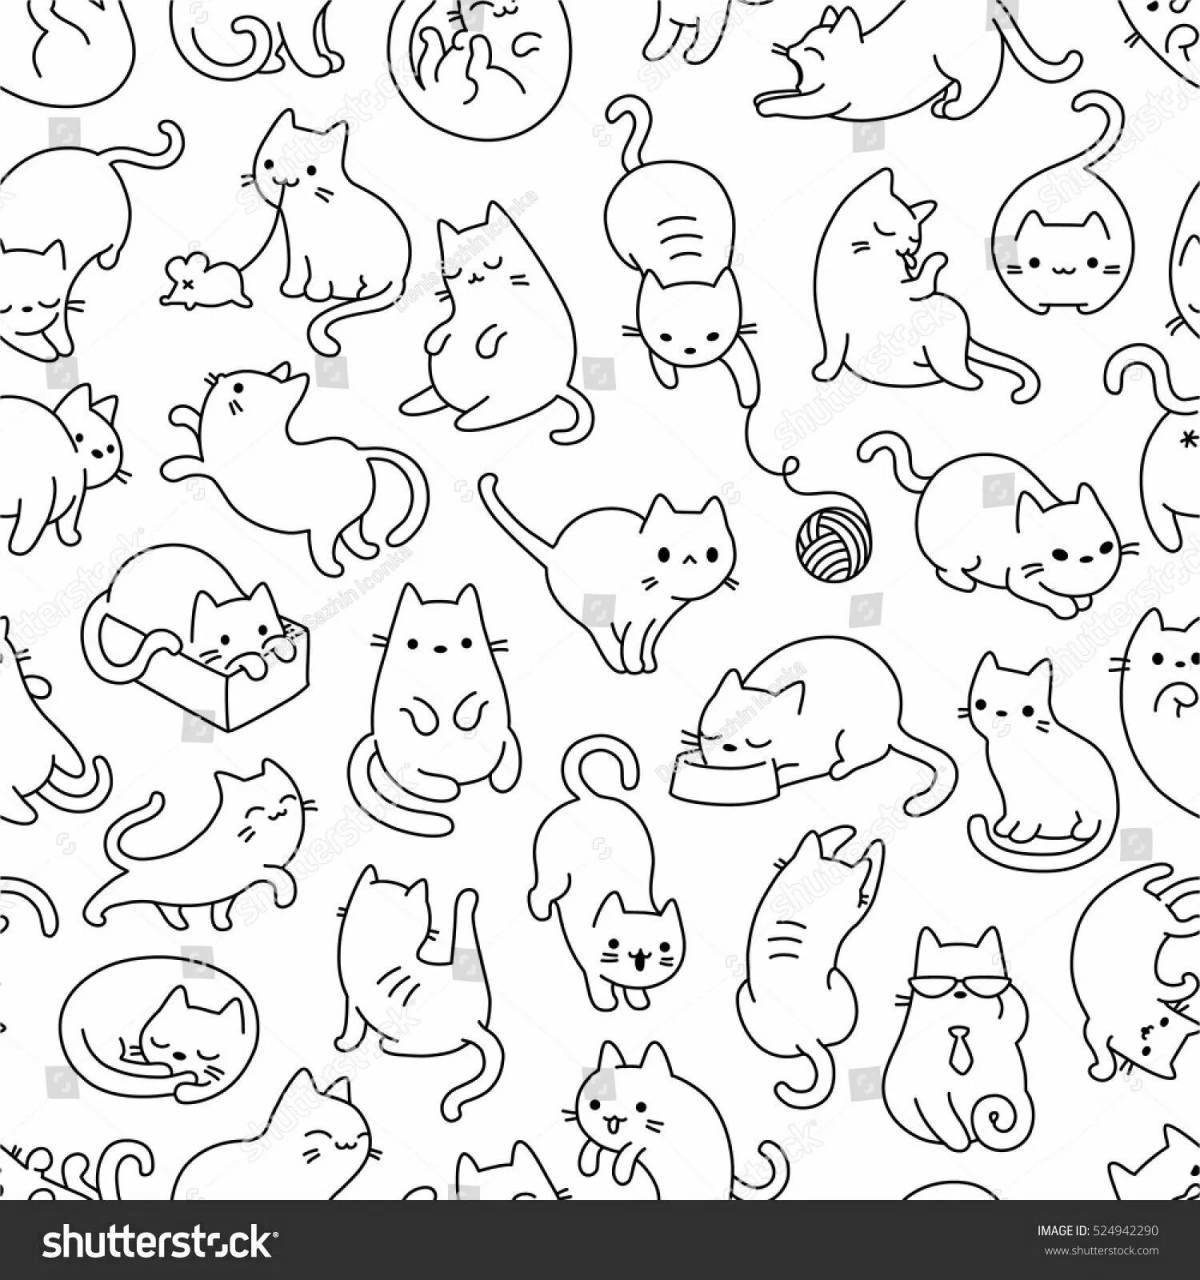 Cute many cats on one page